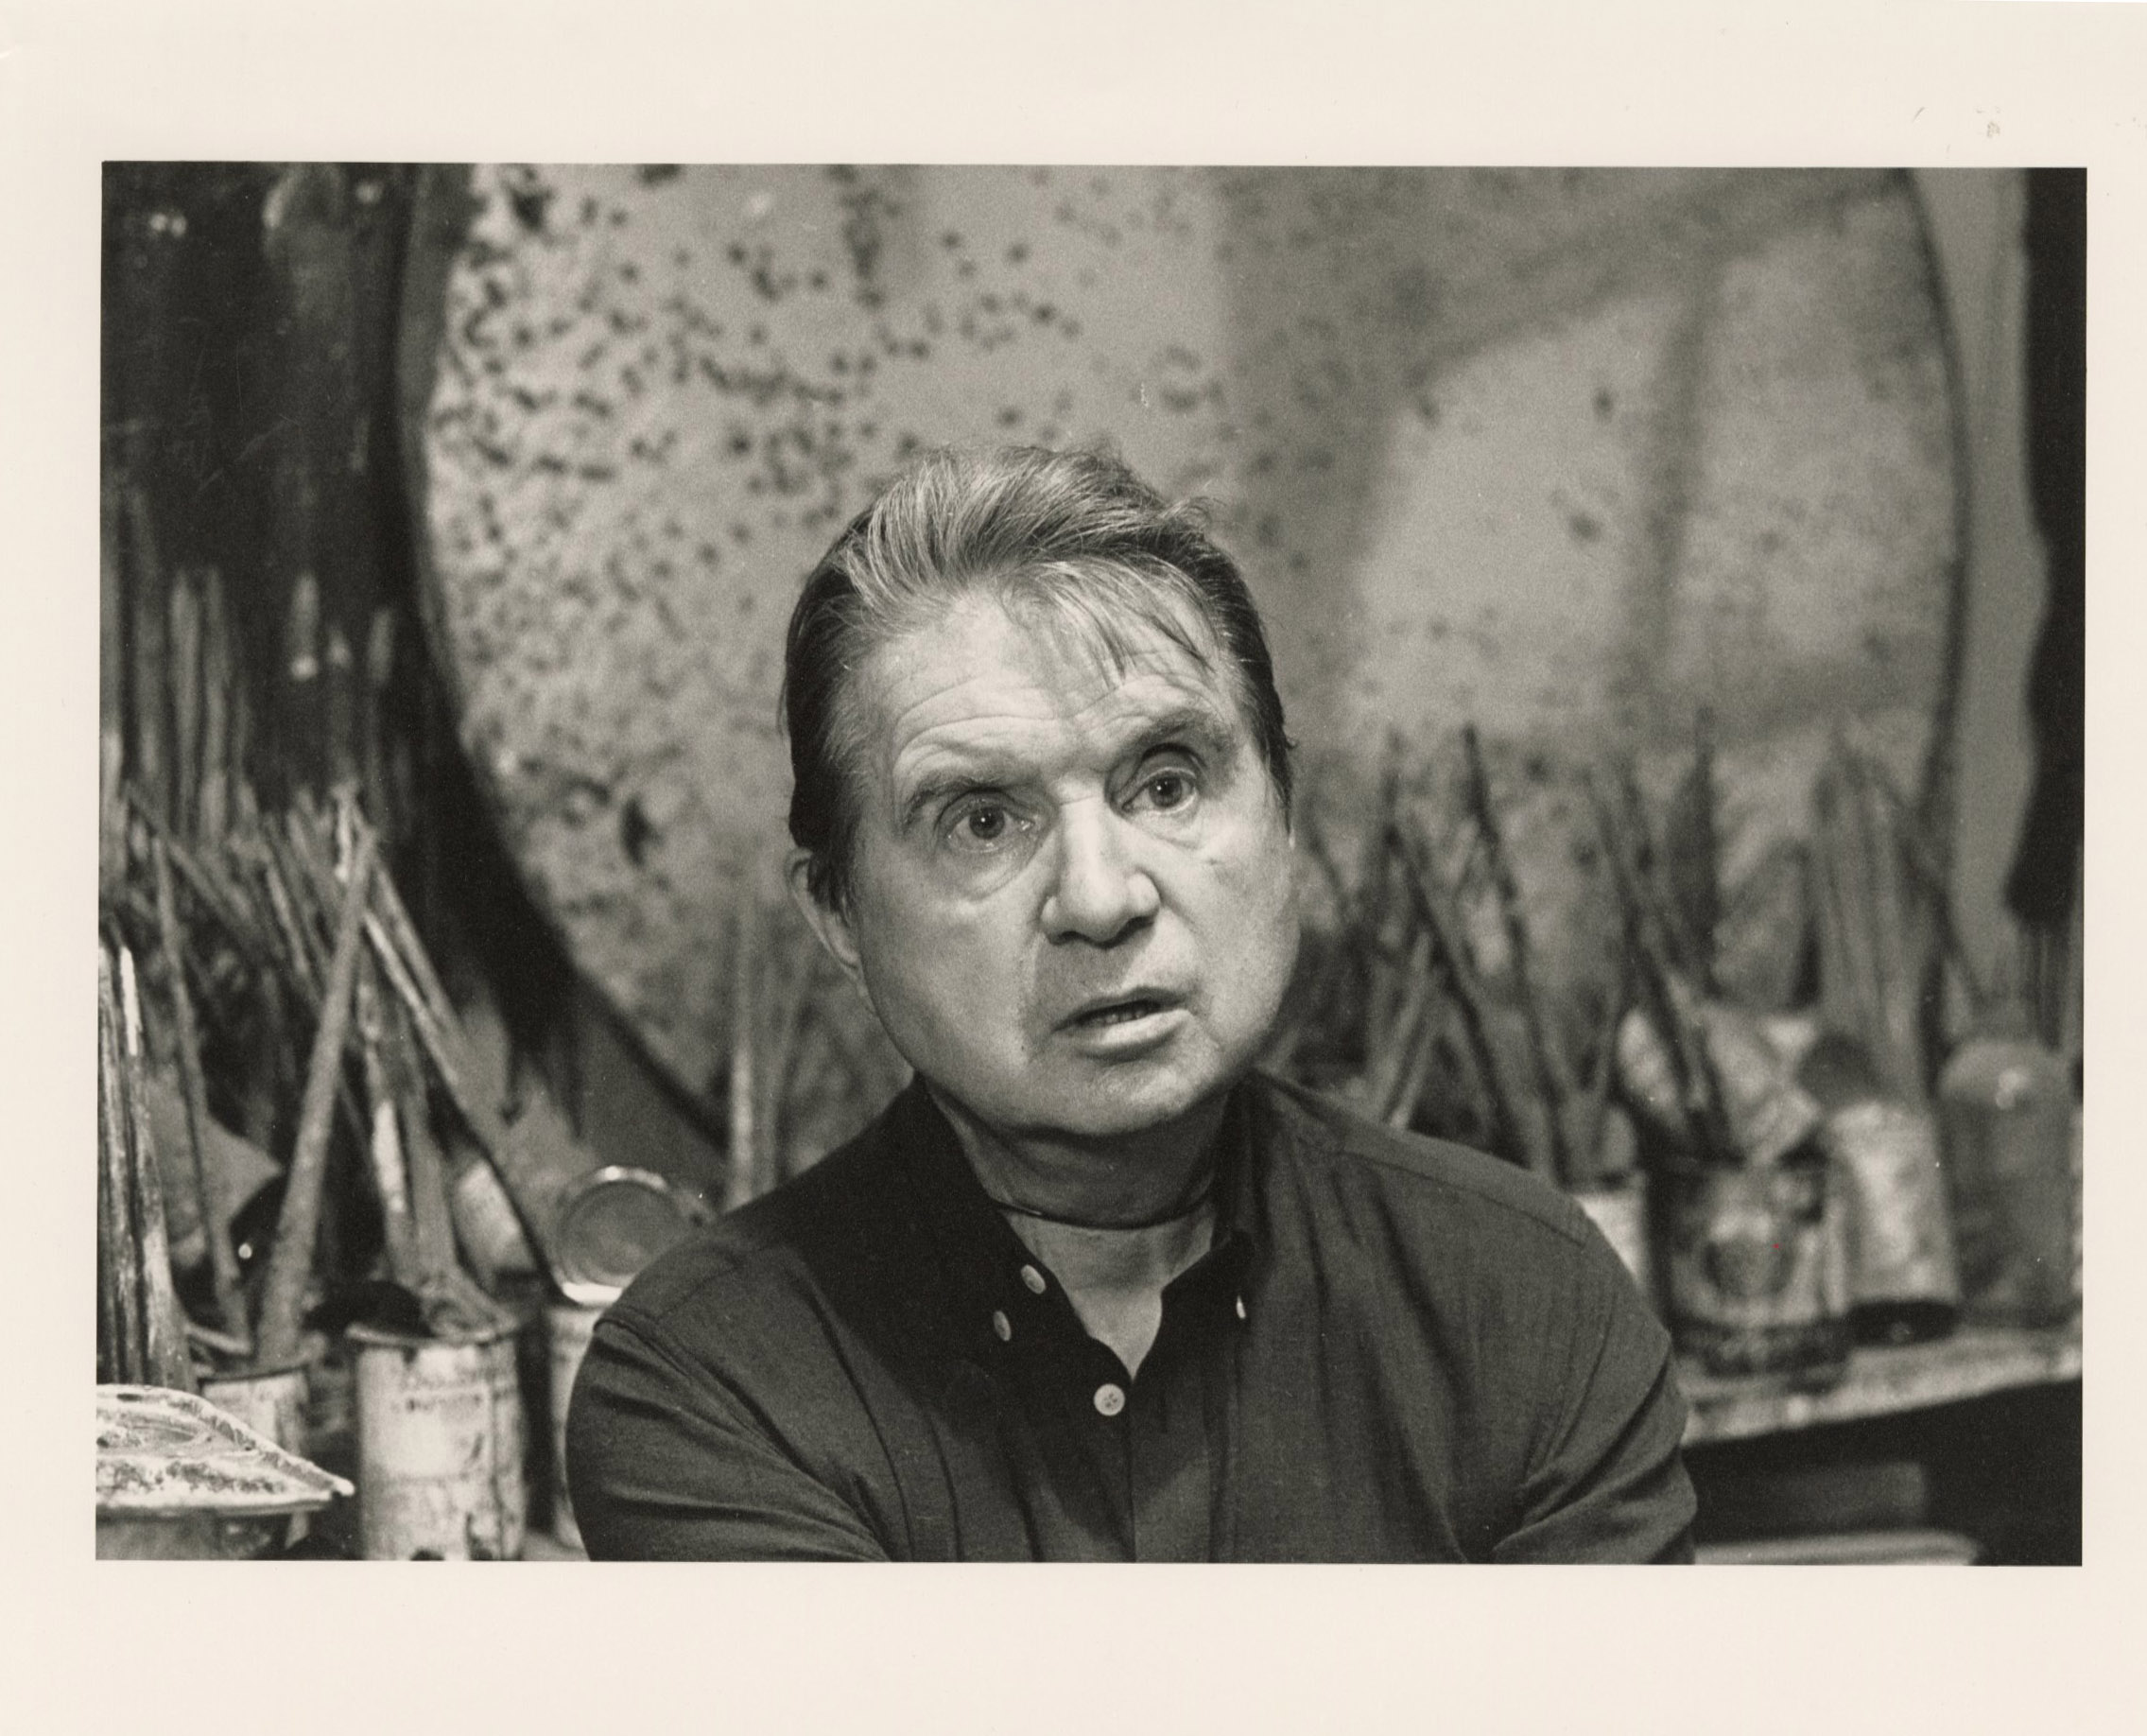 Jane Bown, Francis Bacon, 1980 © Jane Bown Estate Collection and Image © The Estate of Francis Bacon